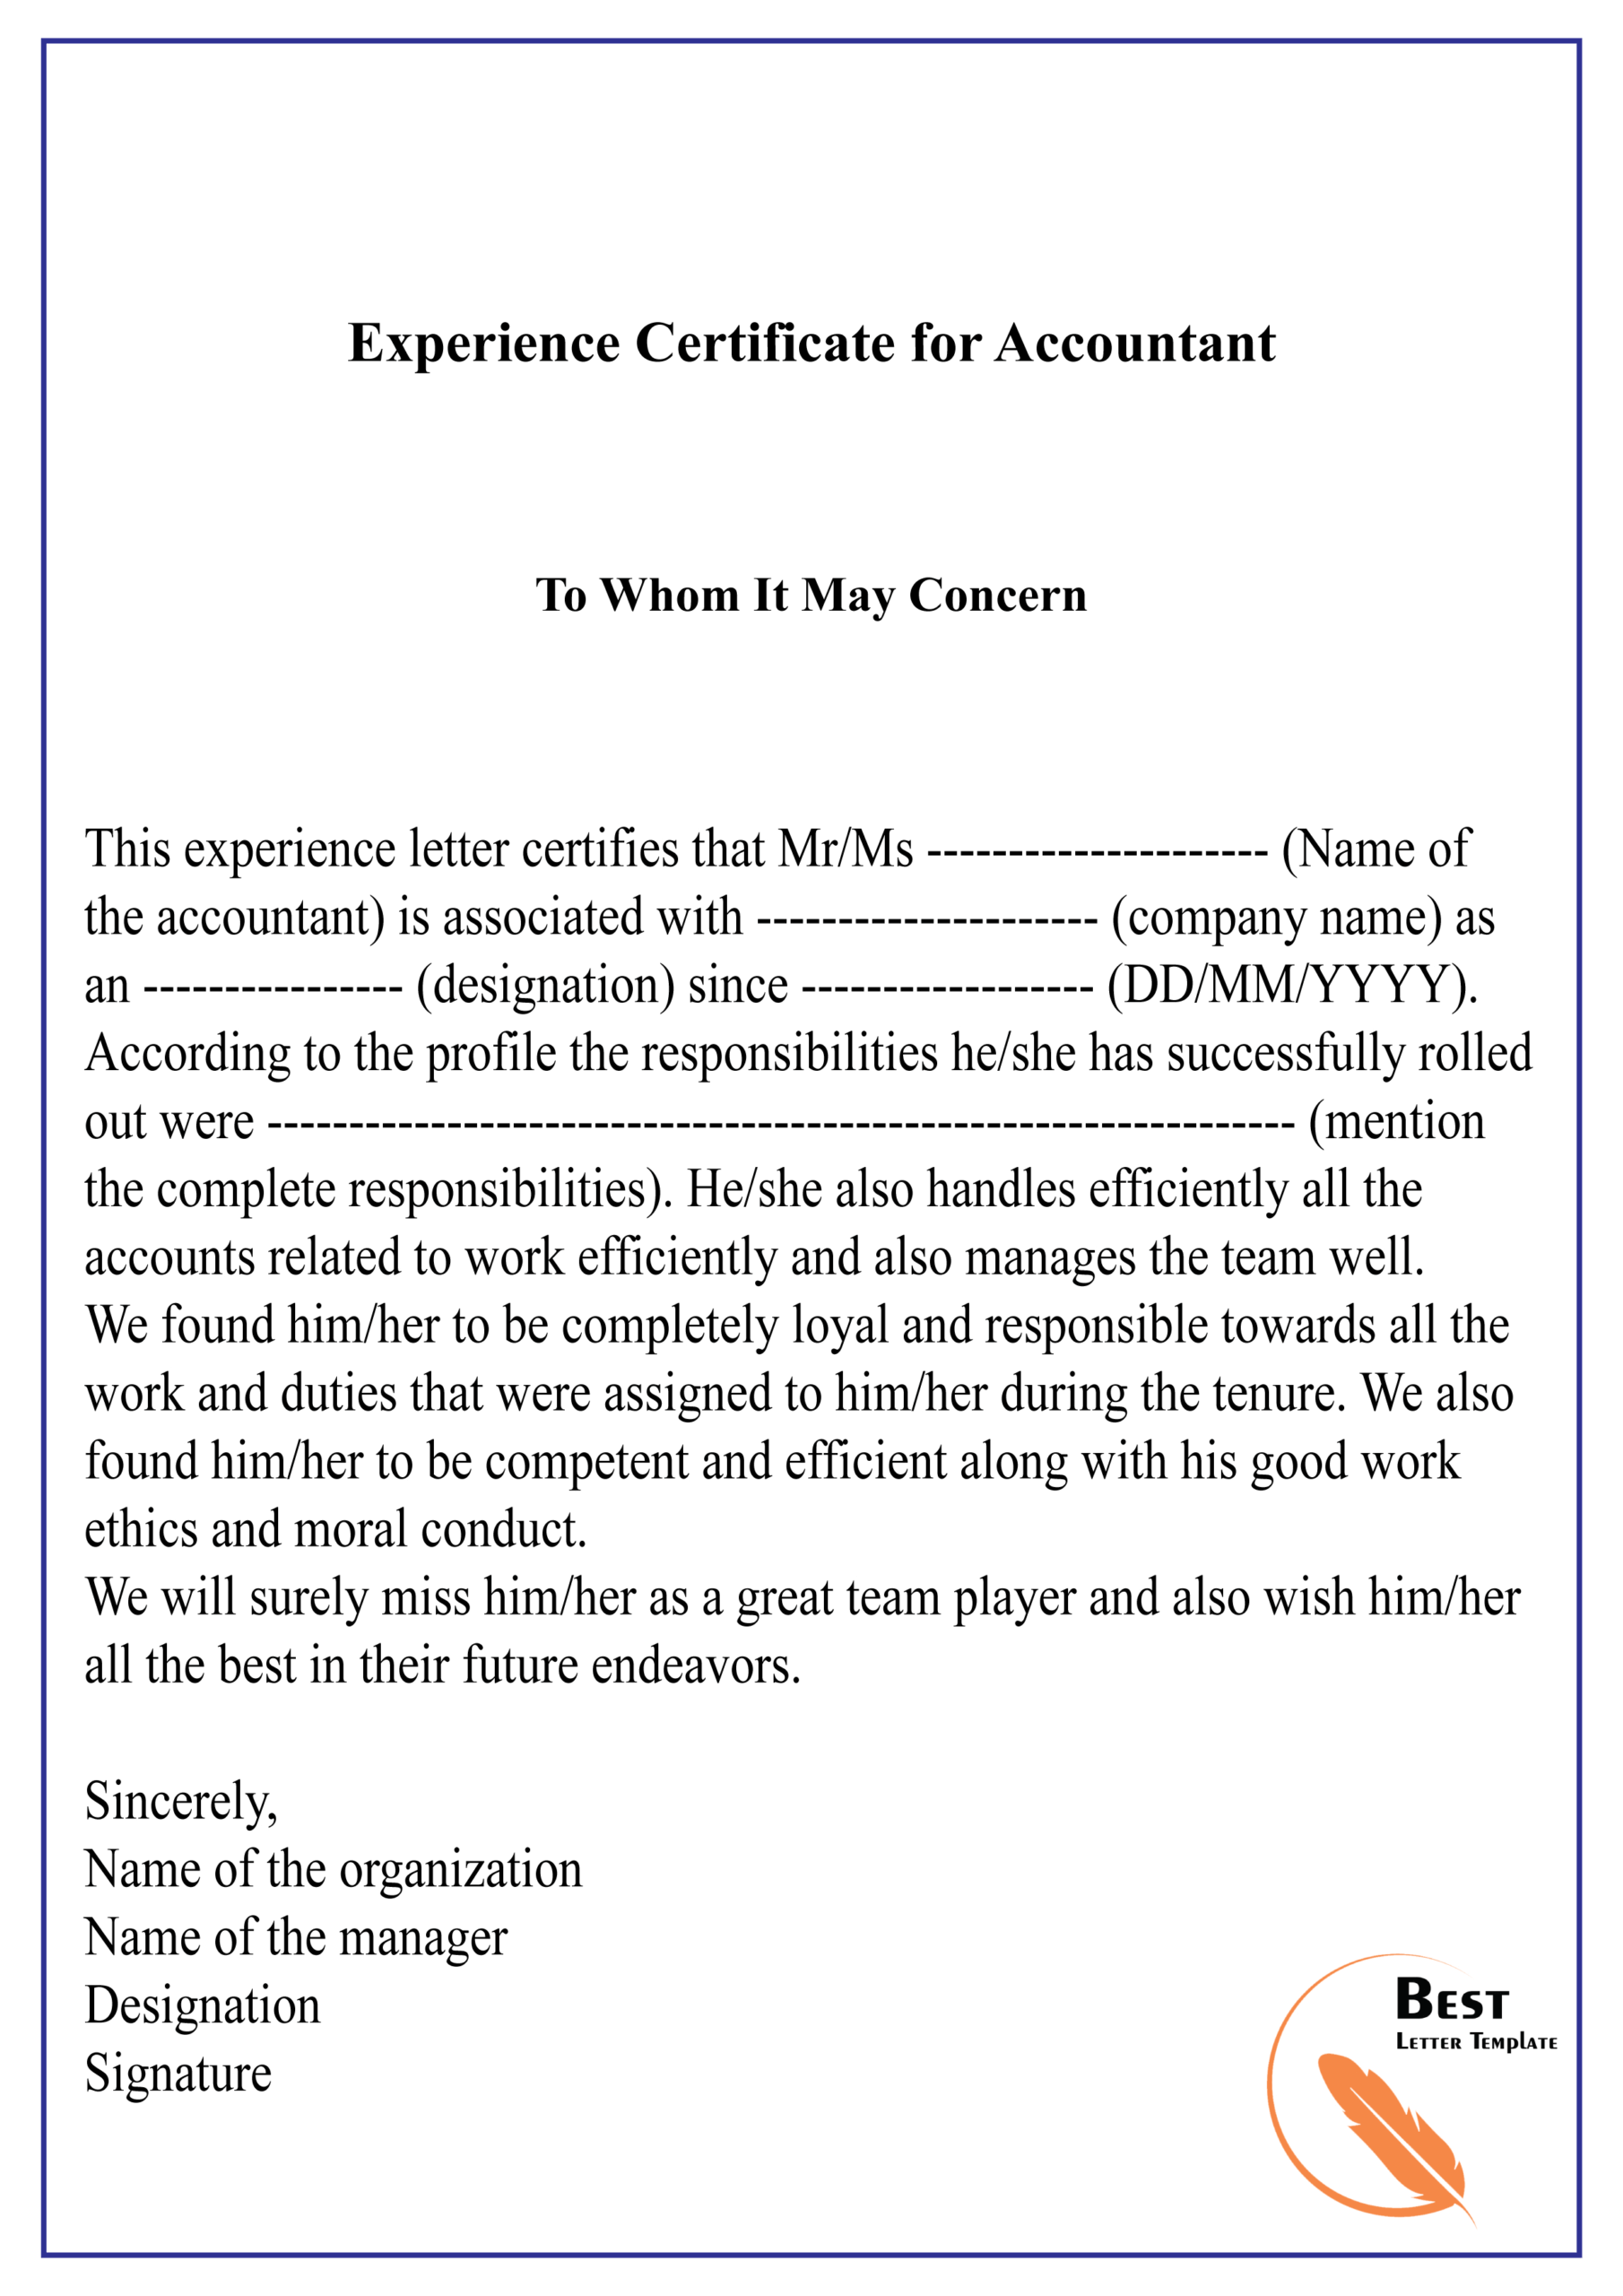 Experience Certificate For Accountant 01 | Best Letter Template Within Certificate Of Experience Template